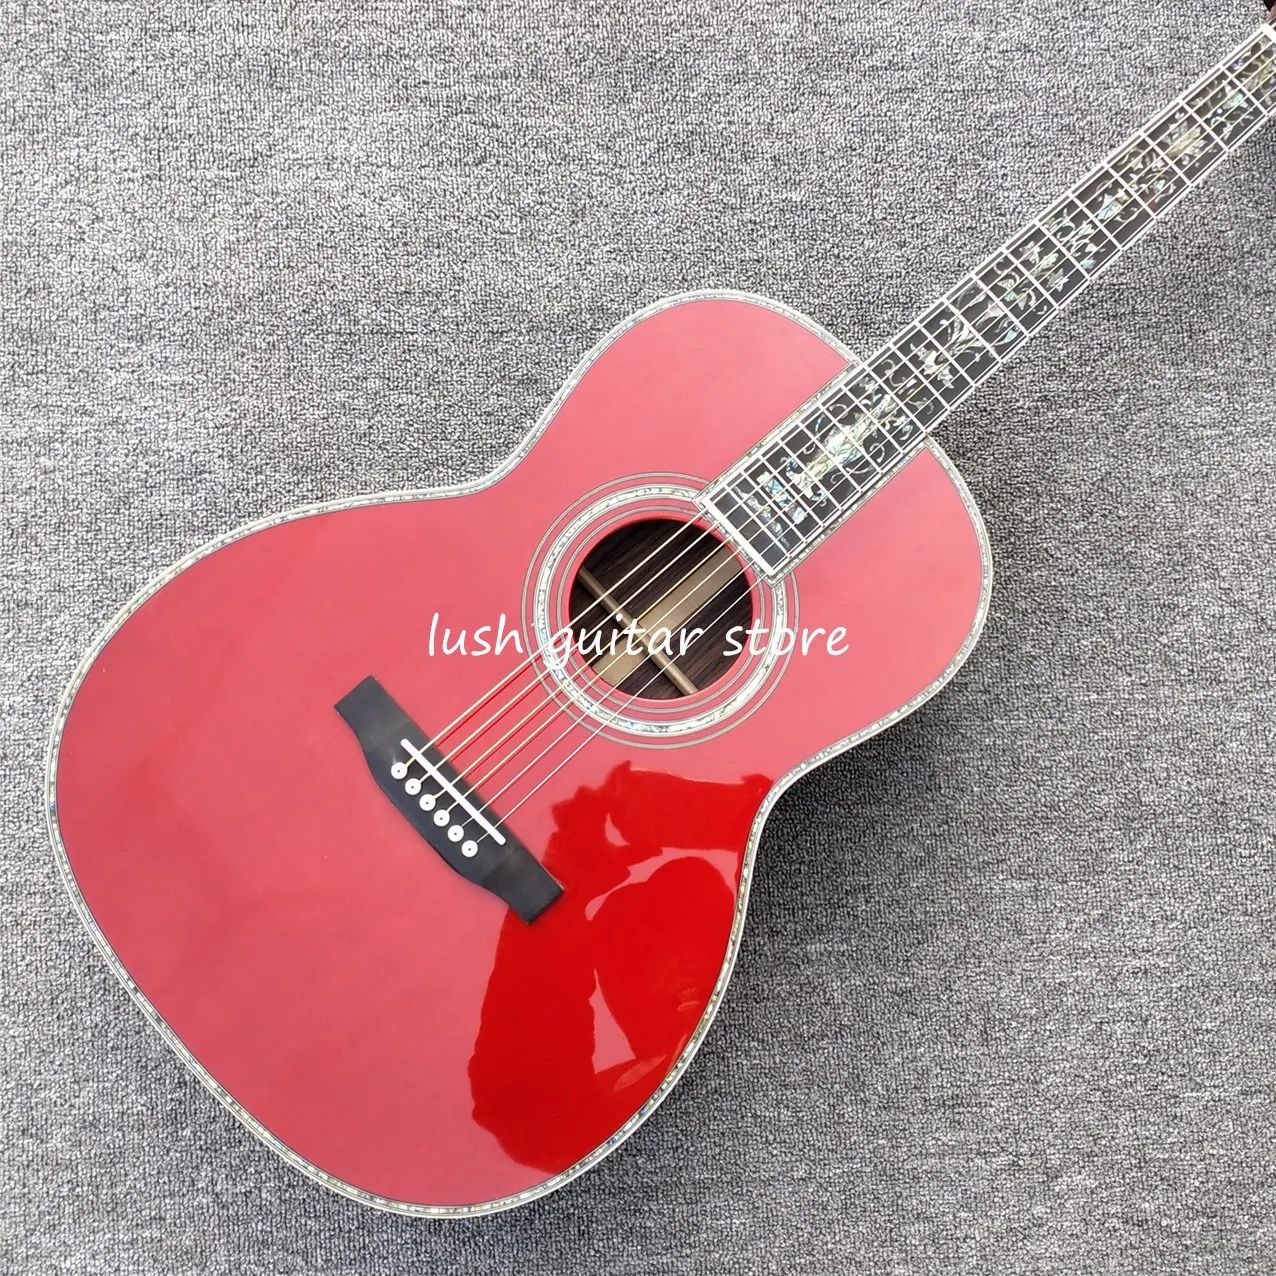 

2021 New ooo Model Red Acoustic Guitar, Factory custom ,39 Inches ,Real Abalone Inlay Guitarra ,Ebony Fingerboard,Free Shipping